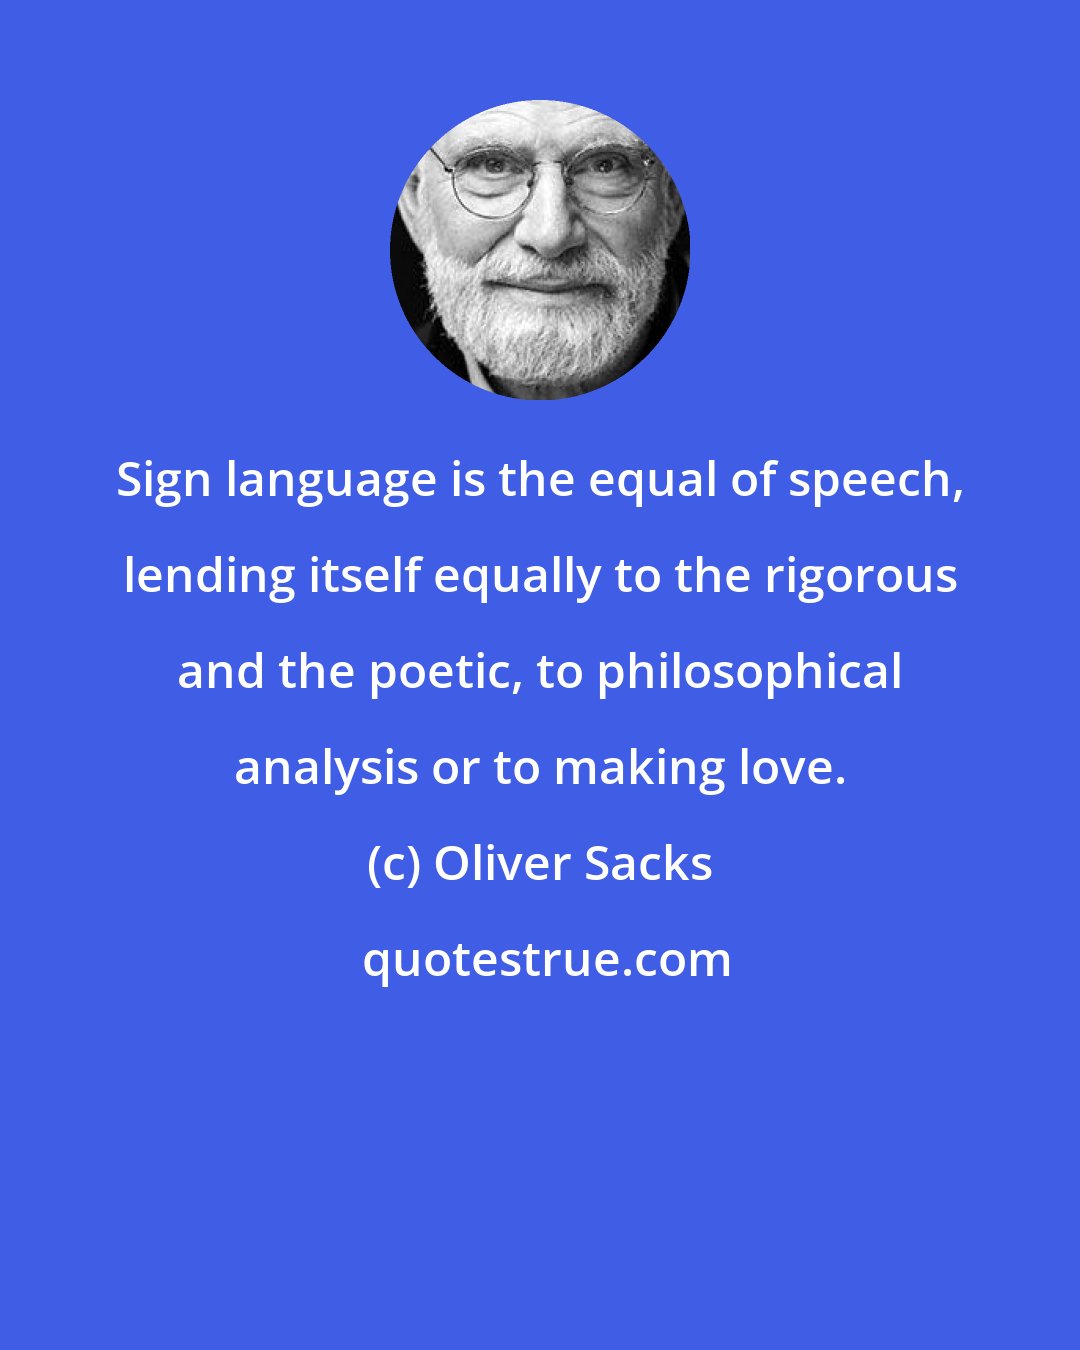 Oliver Sacks: Sign language is the equal of speech, lending itself equally to the rigorous and the poetic, to philosophical analysis or to making love.